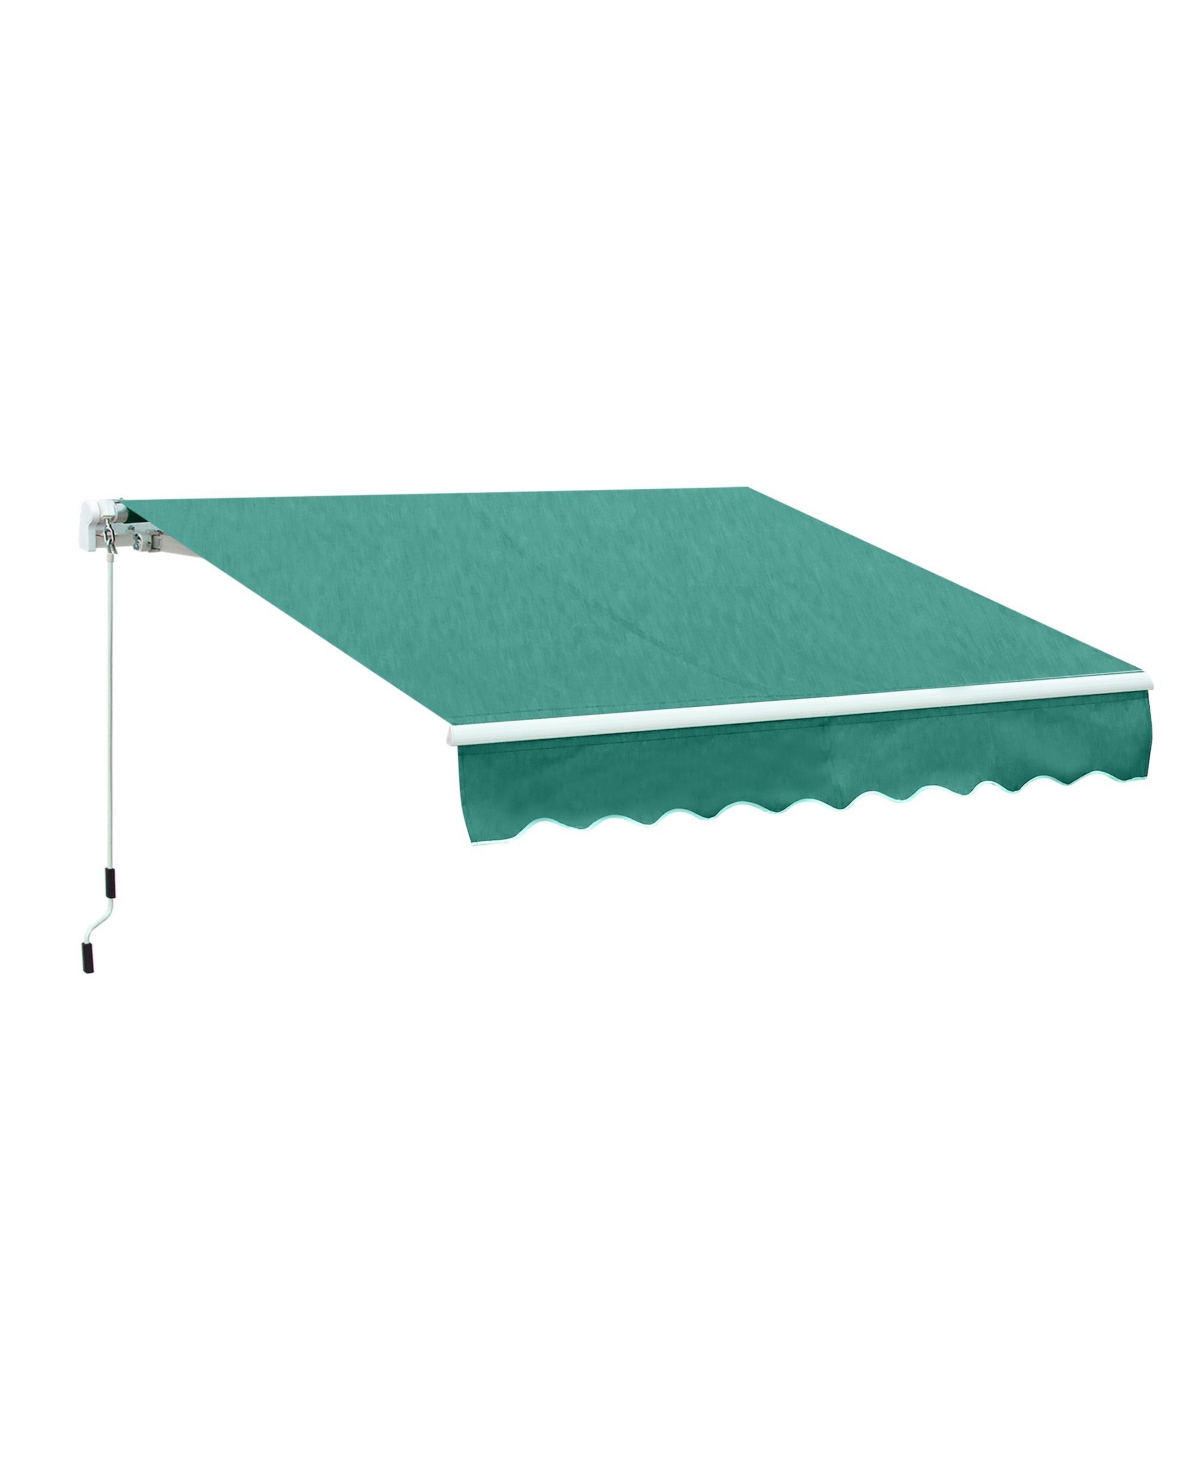 10' x 8' Manual Retractable Sun Shade Patio Awning with Uv Protection and Easy Crank Opening, Green - Dark green